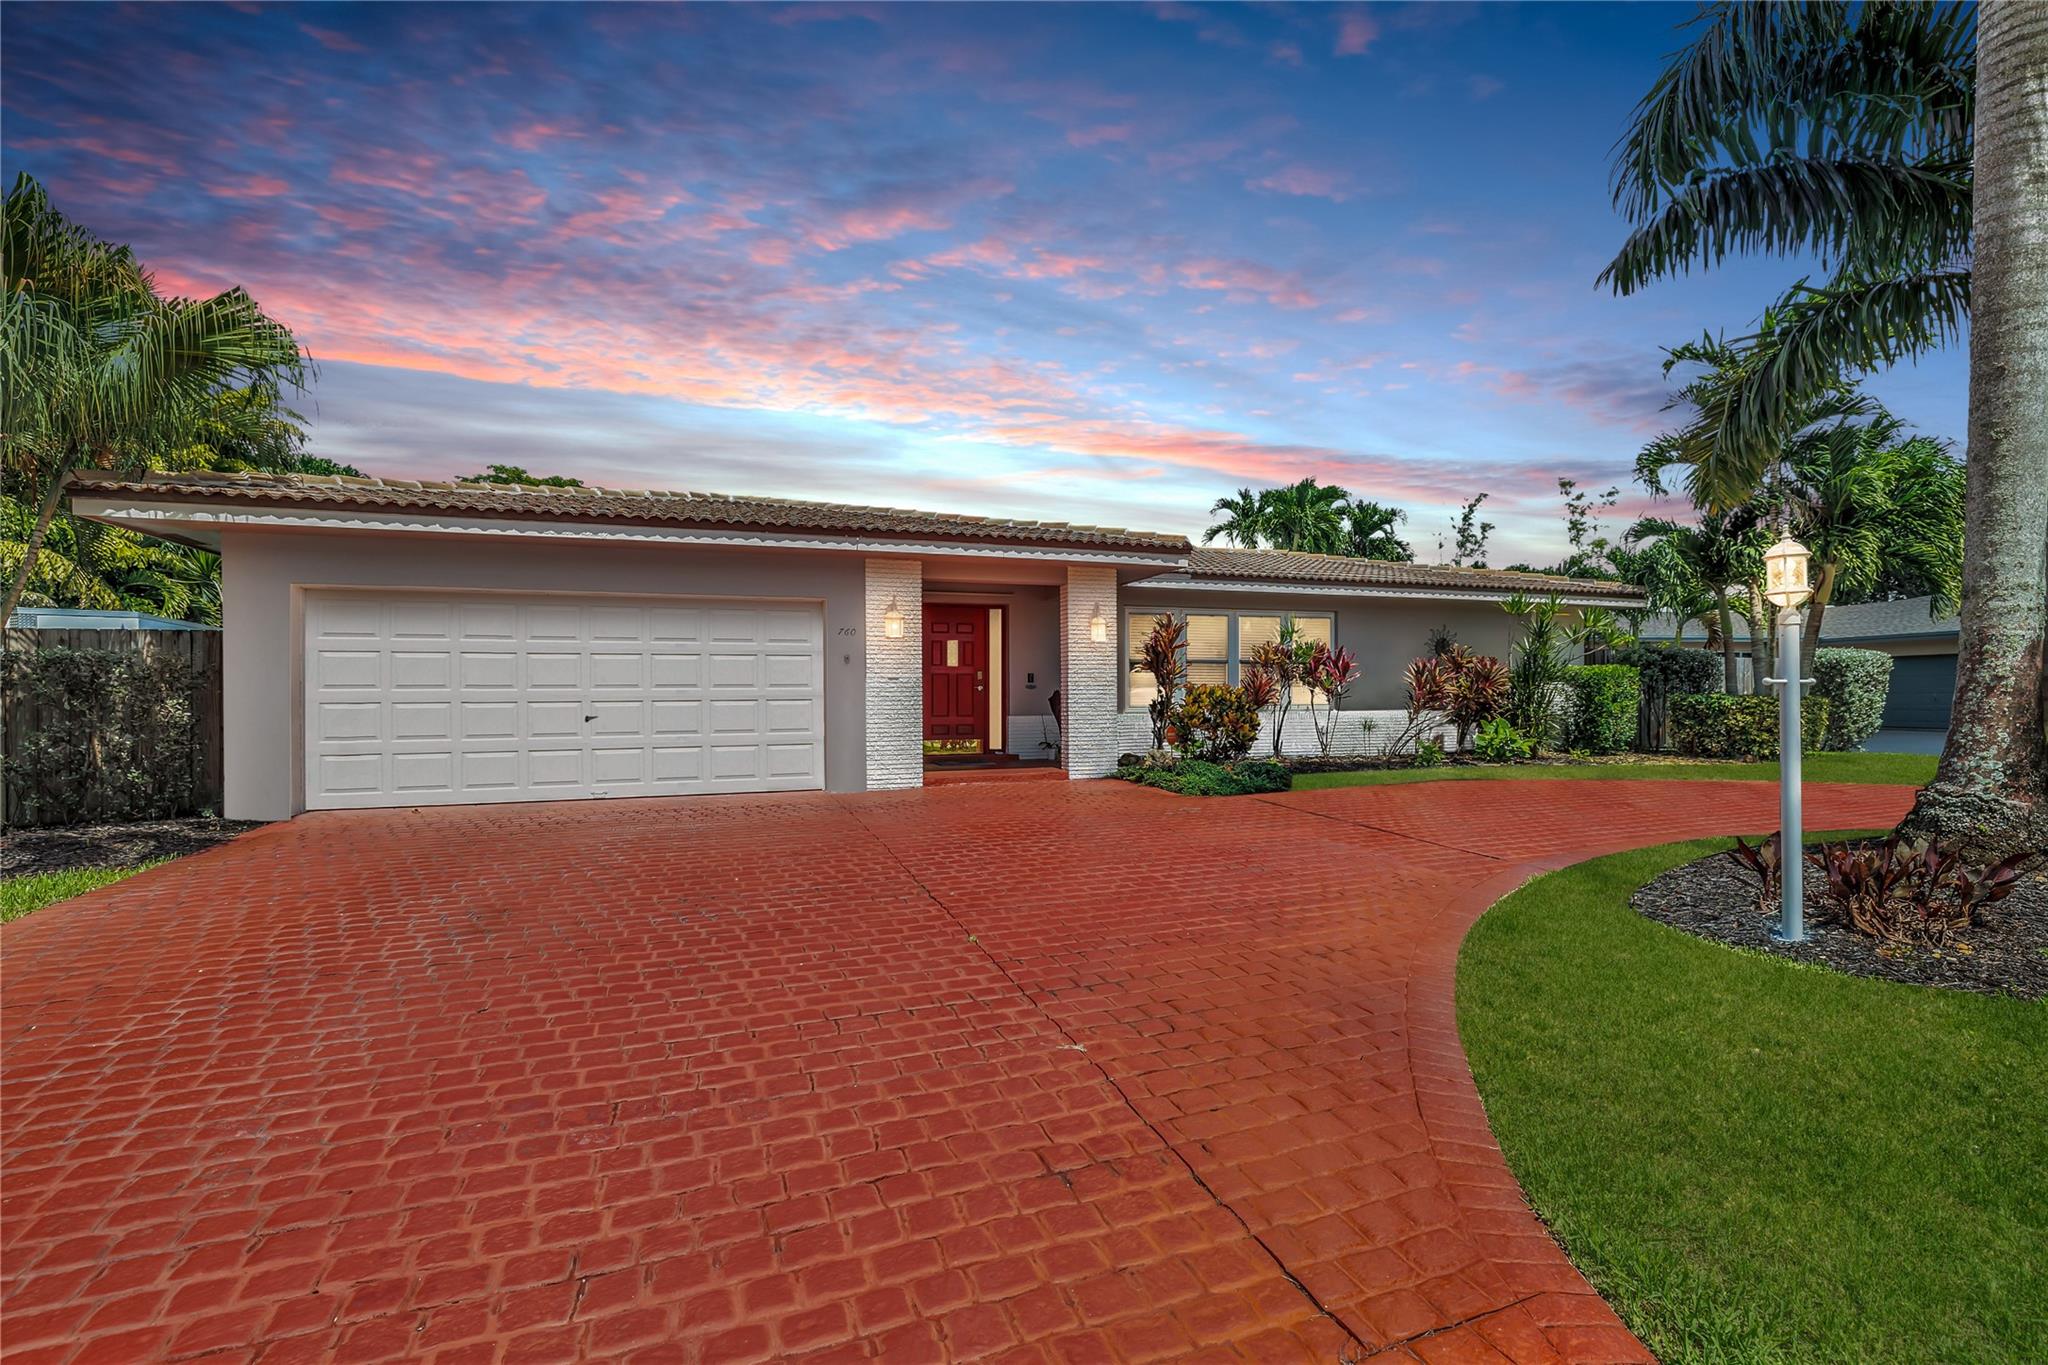 Located in a vibrant town full of opportunities, this beautiful home is just minutes from the Broward Mall and Sawgrass Mills Mall, with easy access to major highways. This sought-after Capri floor plan 4/2 in a true split layout, with the primary bedroom on the right and secondary bedrooms on the left. The kitchen features contrasting cabinets, stainless steel appliances, & a wonderful view, perfect for keeping an eye on the kids while cooking. Adjacent to the kitchen are spacious living, family, & dining rooms, providing ample space for family & guests. The covered patio and large saltwater pool—recently updated with new marcite, tiles, light, pool pump, pipes, and jets—are ideal for entertaining. A wrap-around fence ensures privacy and safety for kids and pets. Stay Friendly!